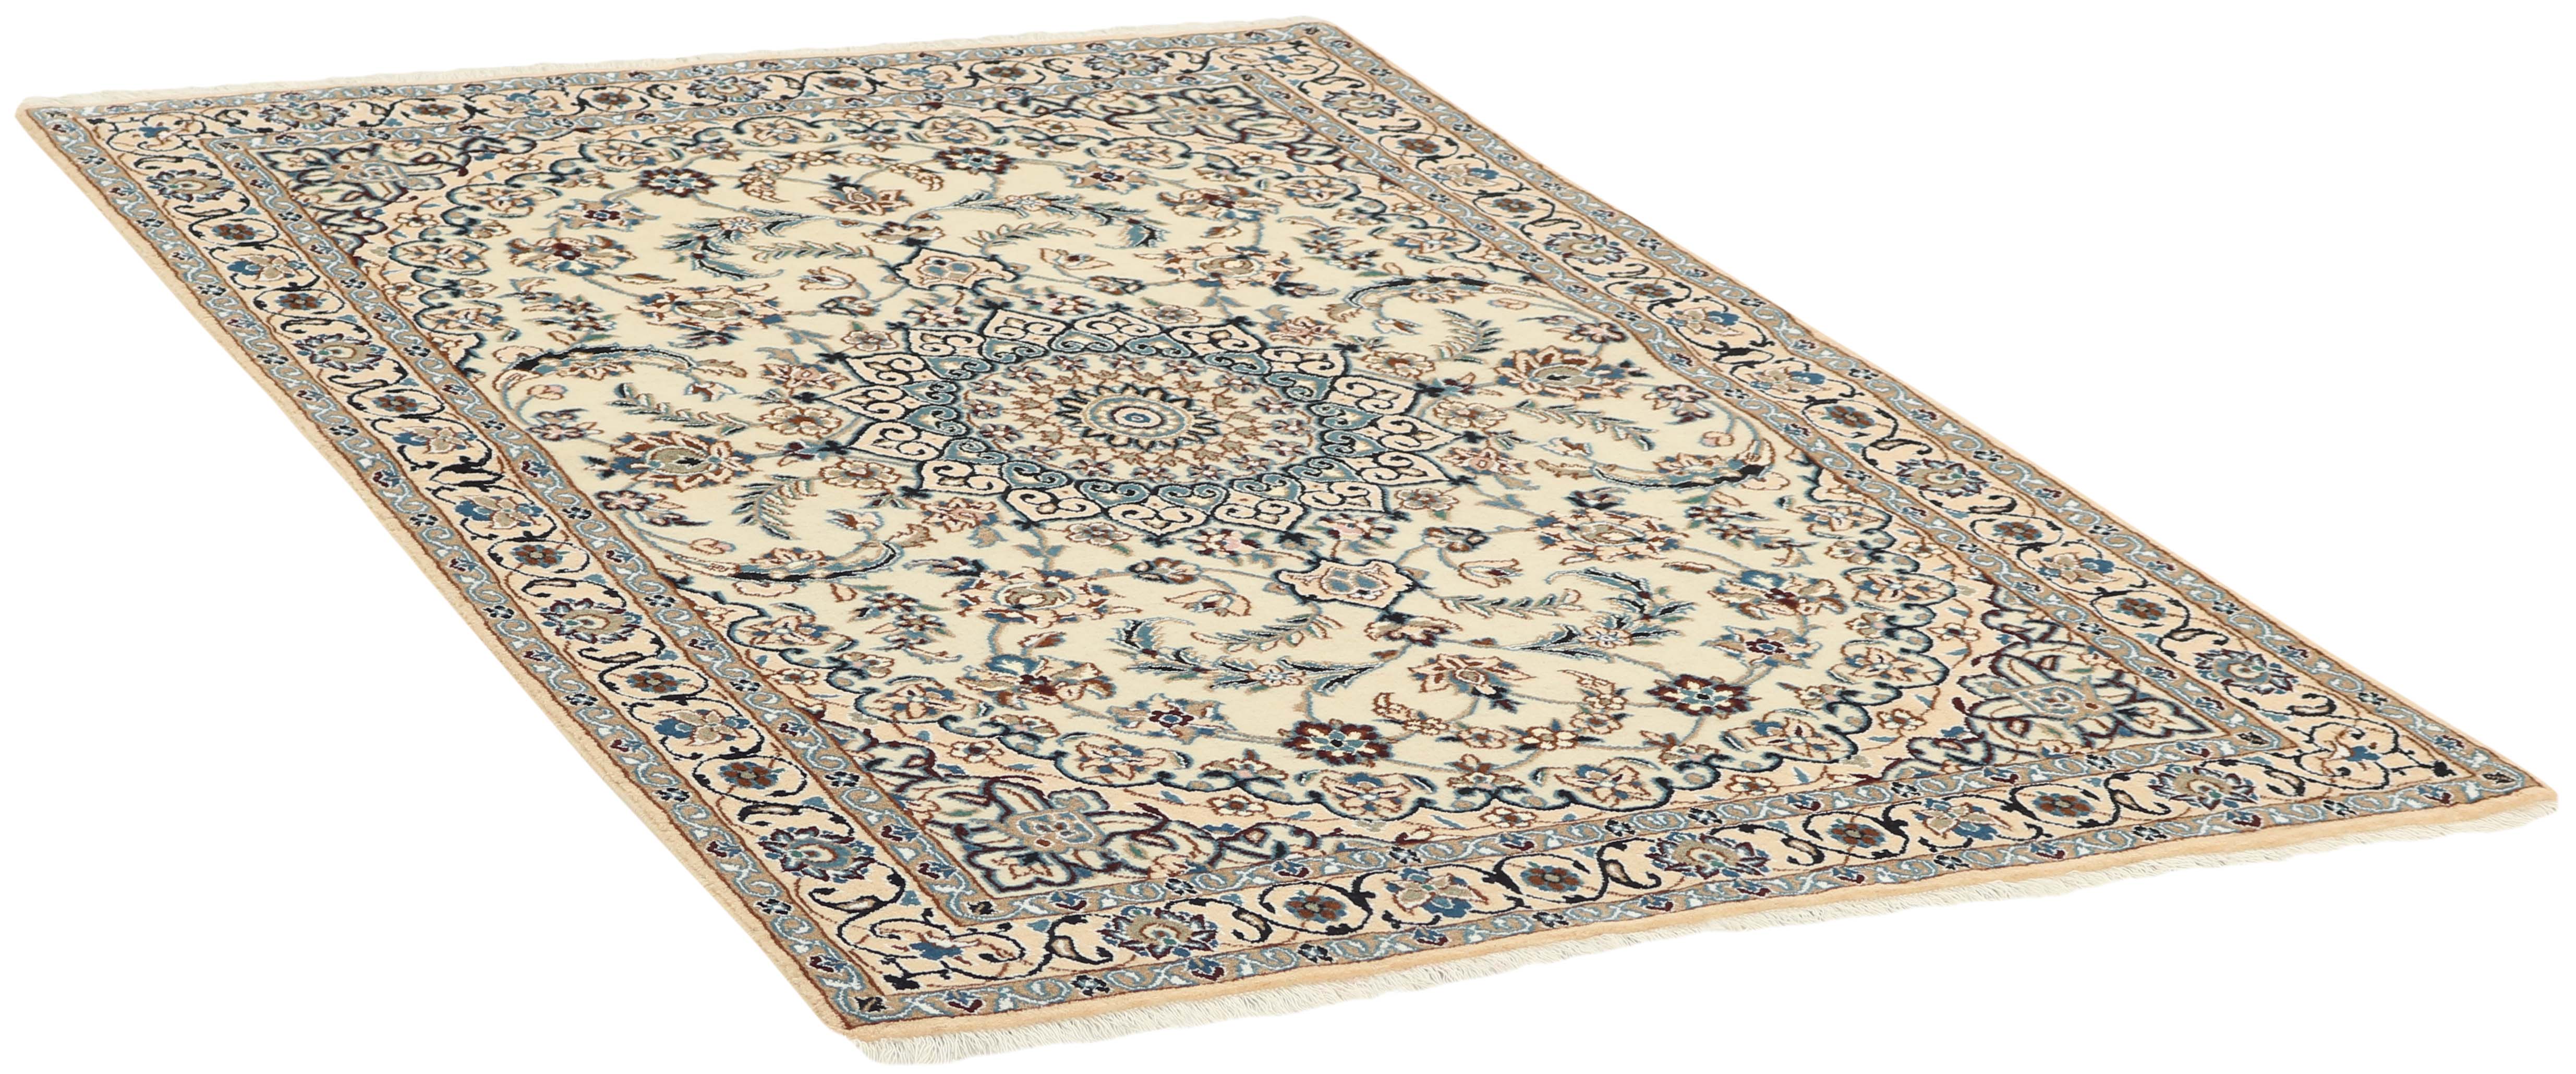 Authentic oriental rug with traditional floral design in beige